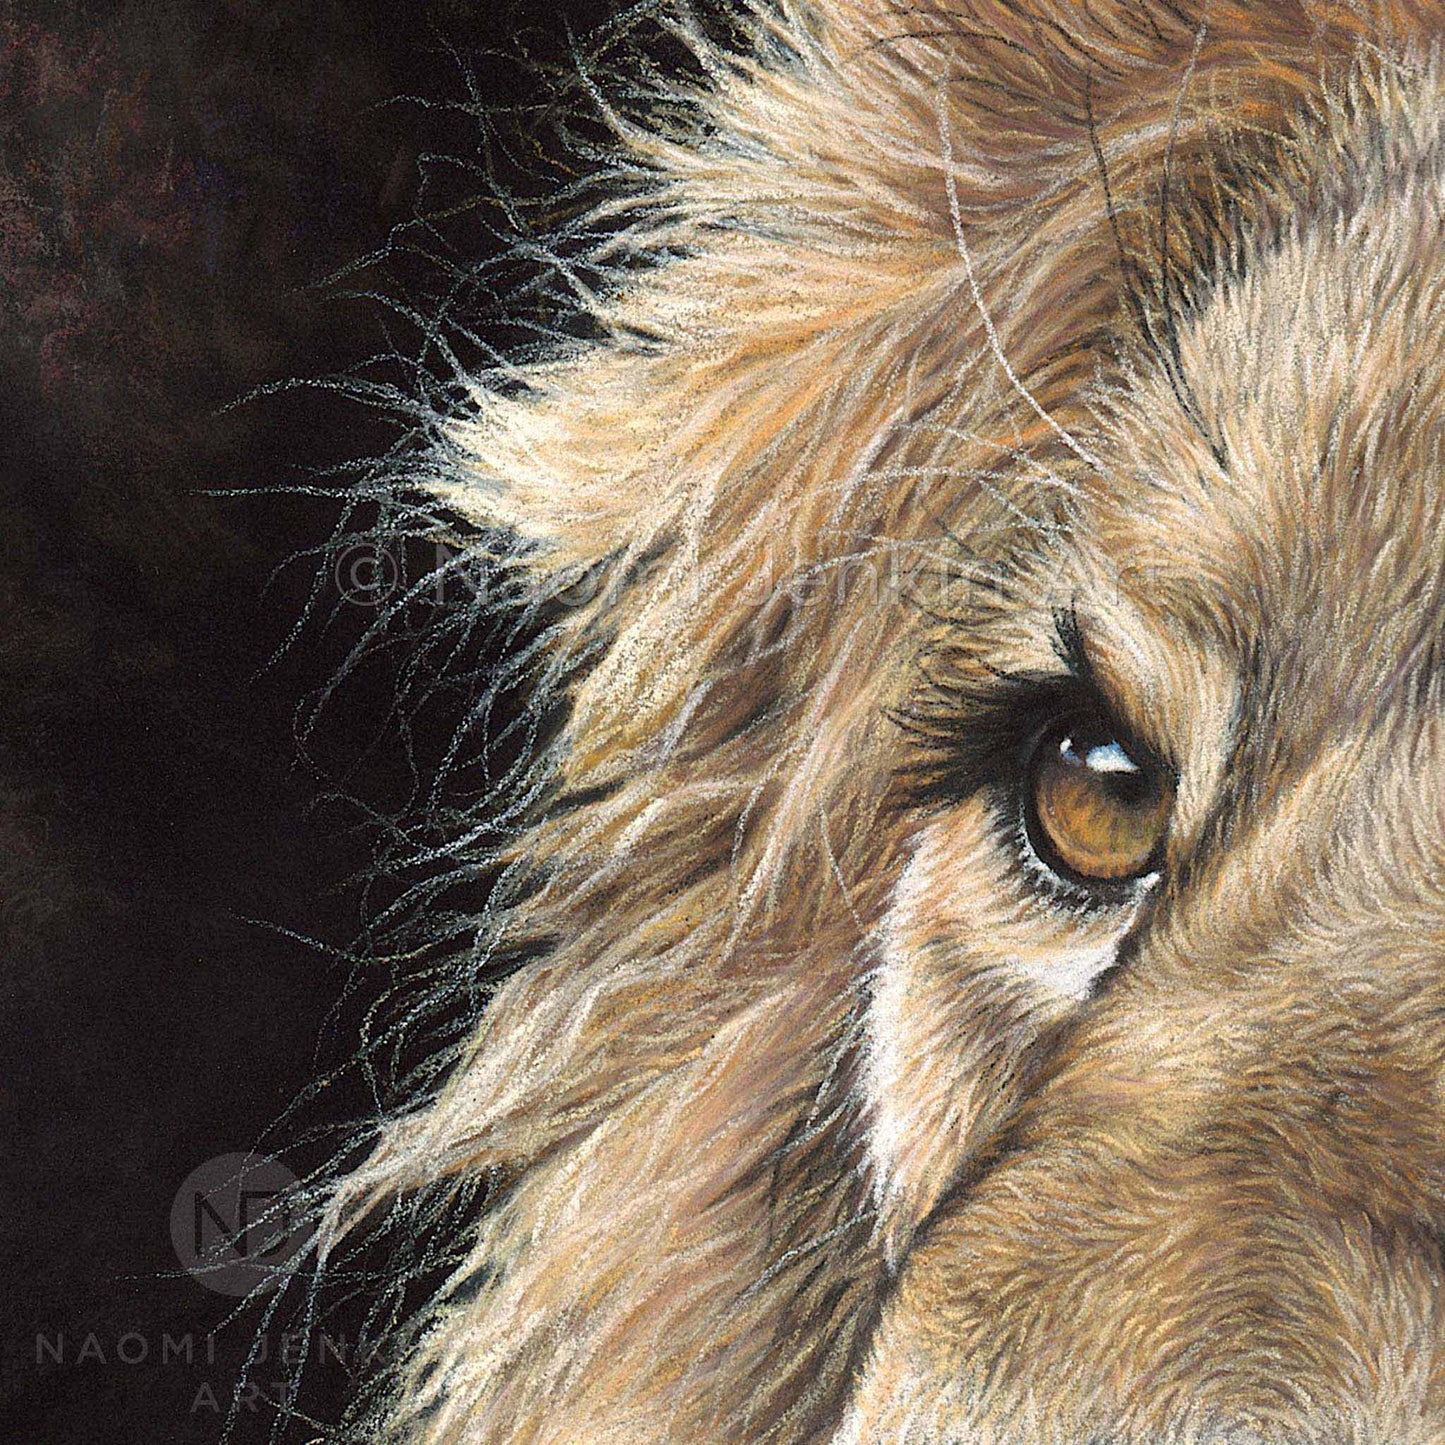 Close up detail of a lion's face and mane from the 'Watchful Eyes' lion painting by Naomi Jenkin